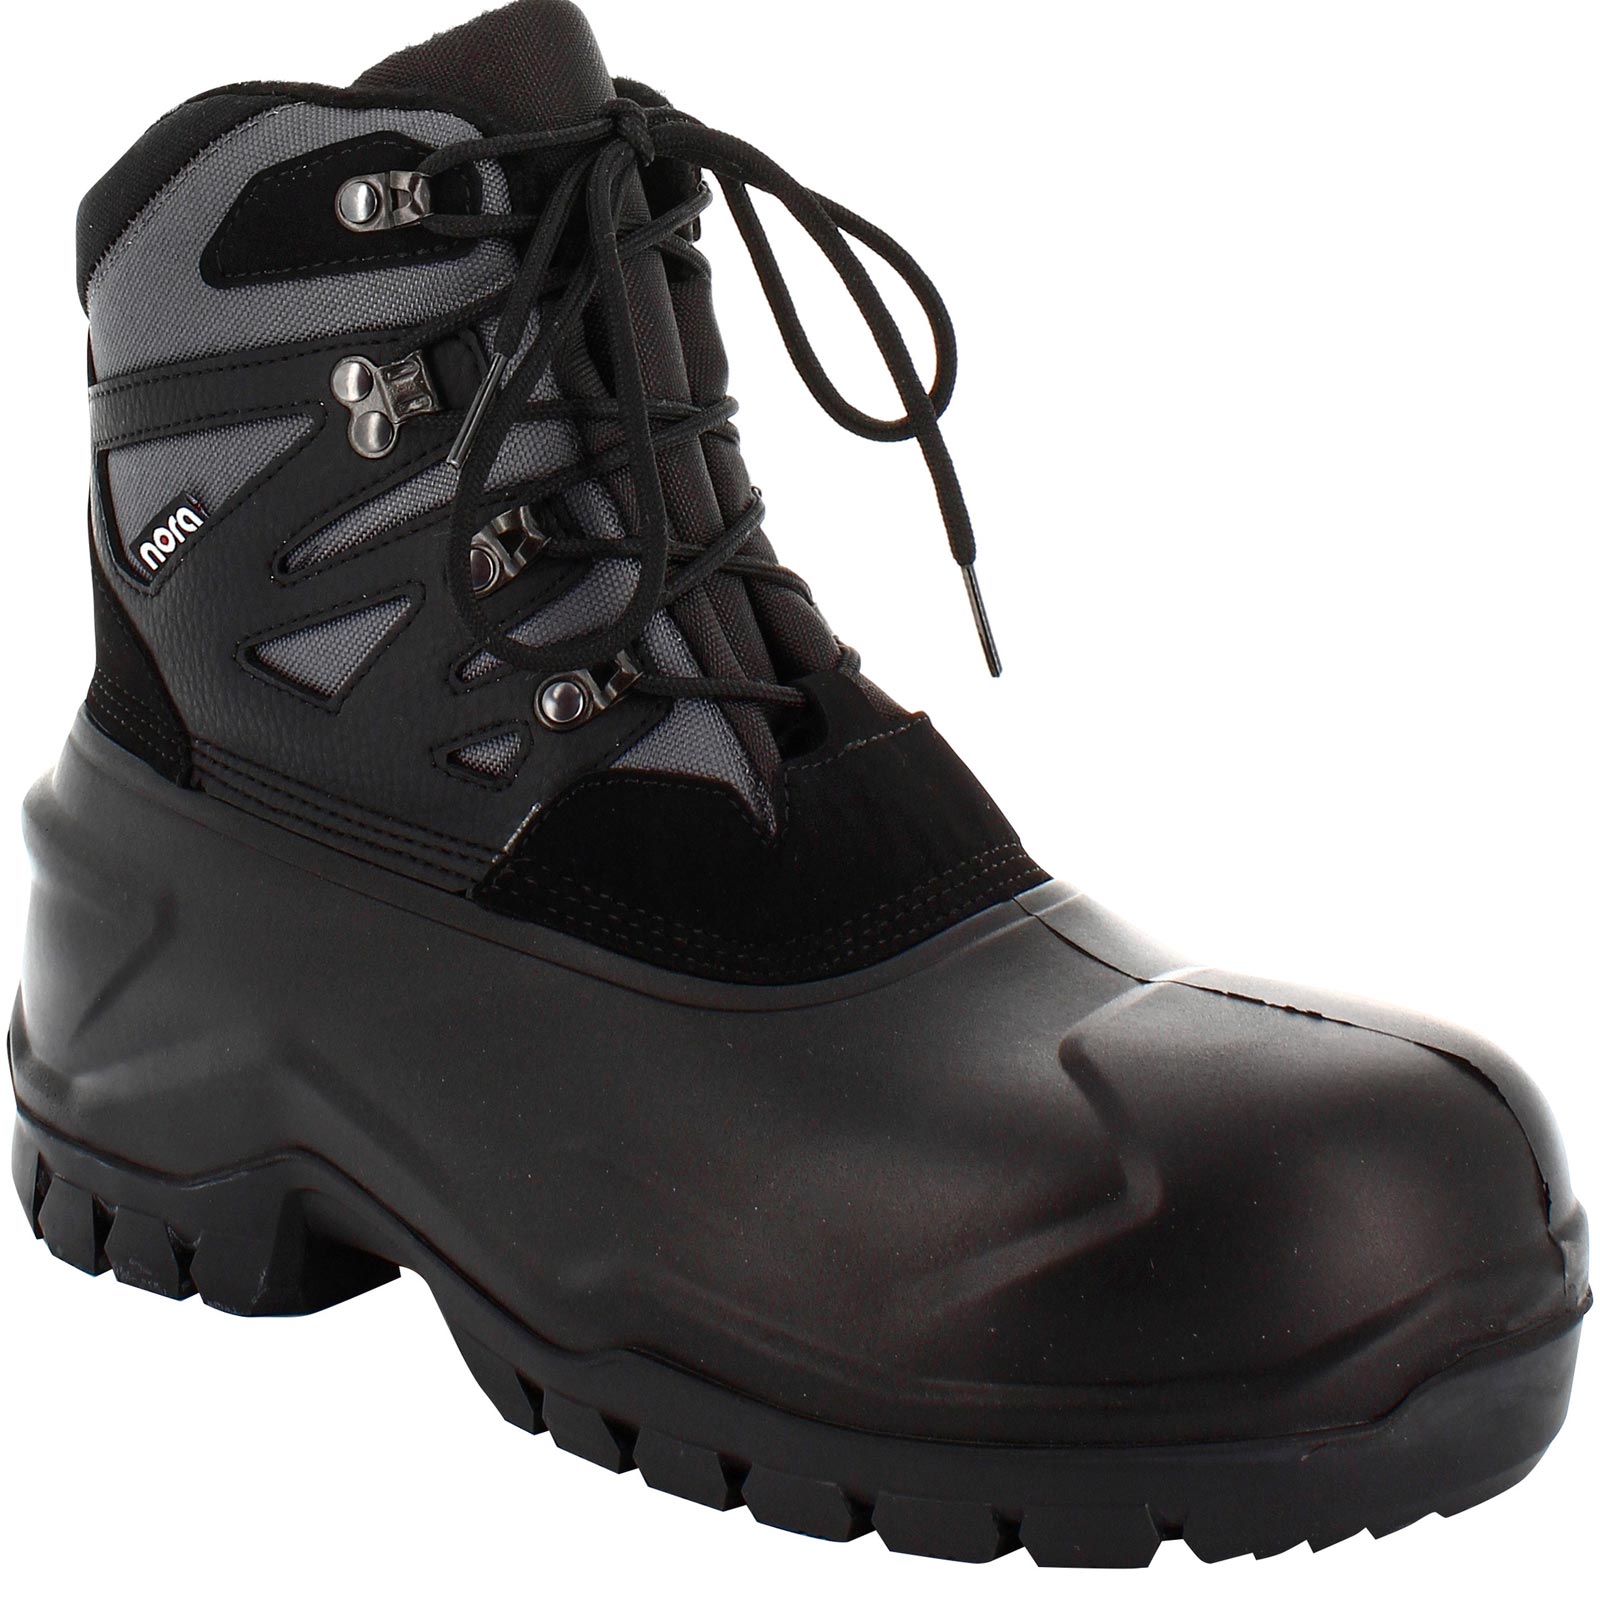 Nora ankle boot Safety-Canadian-Boot UNIK LOW S5